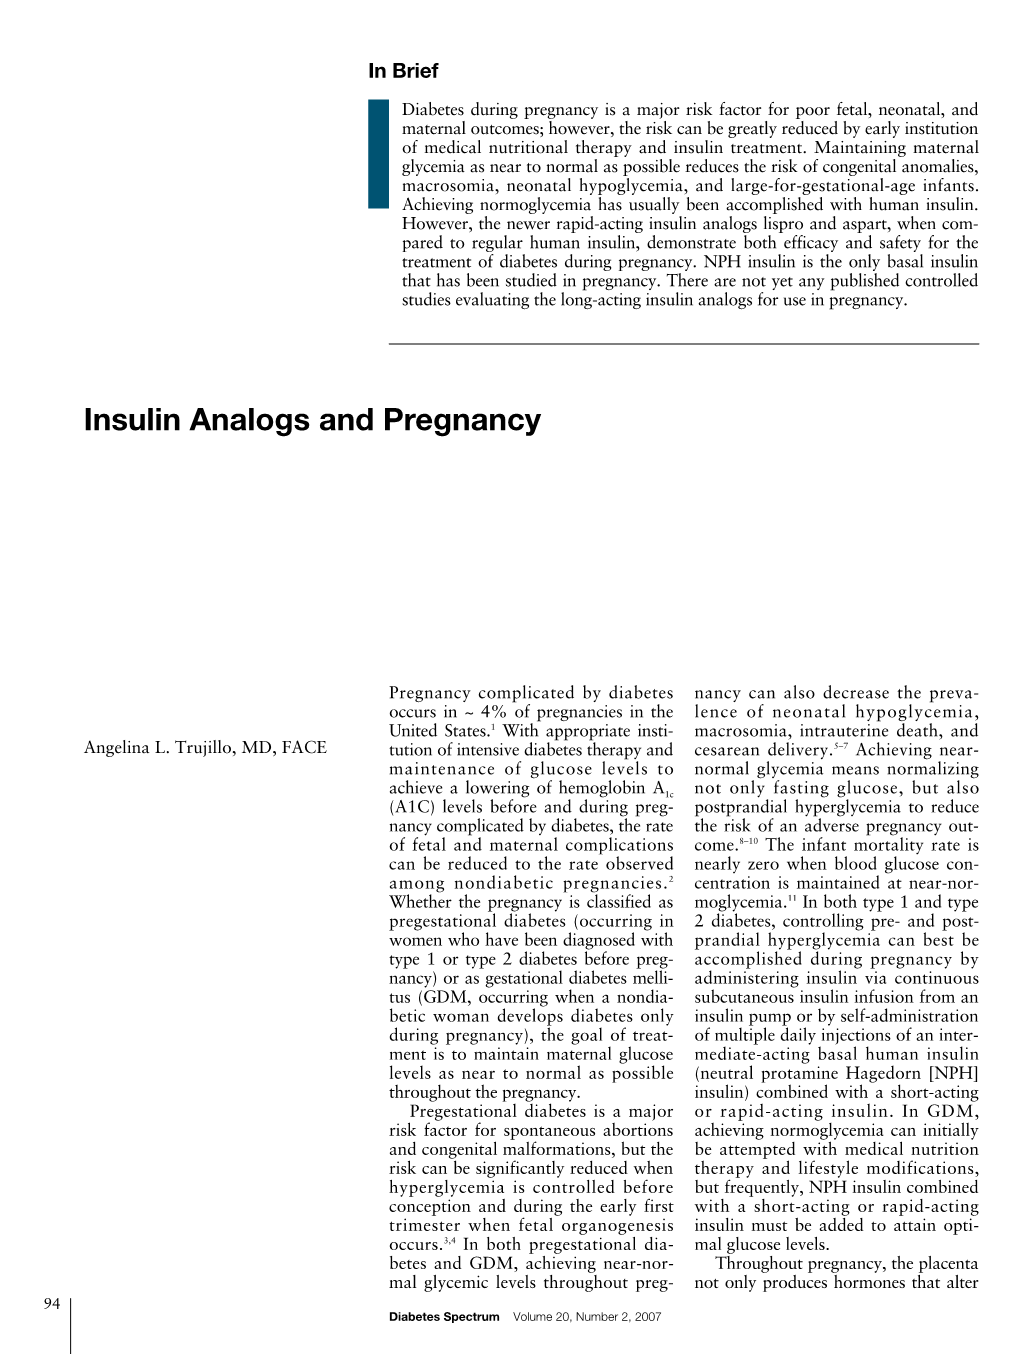 Insulin Analogs and Pregnancy